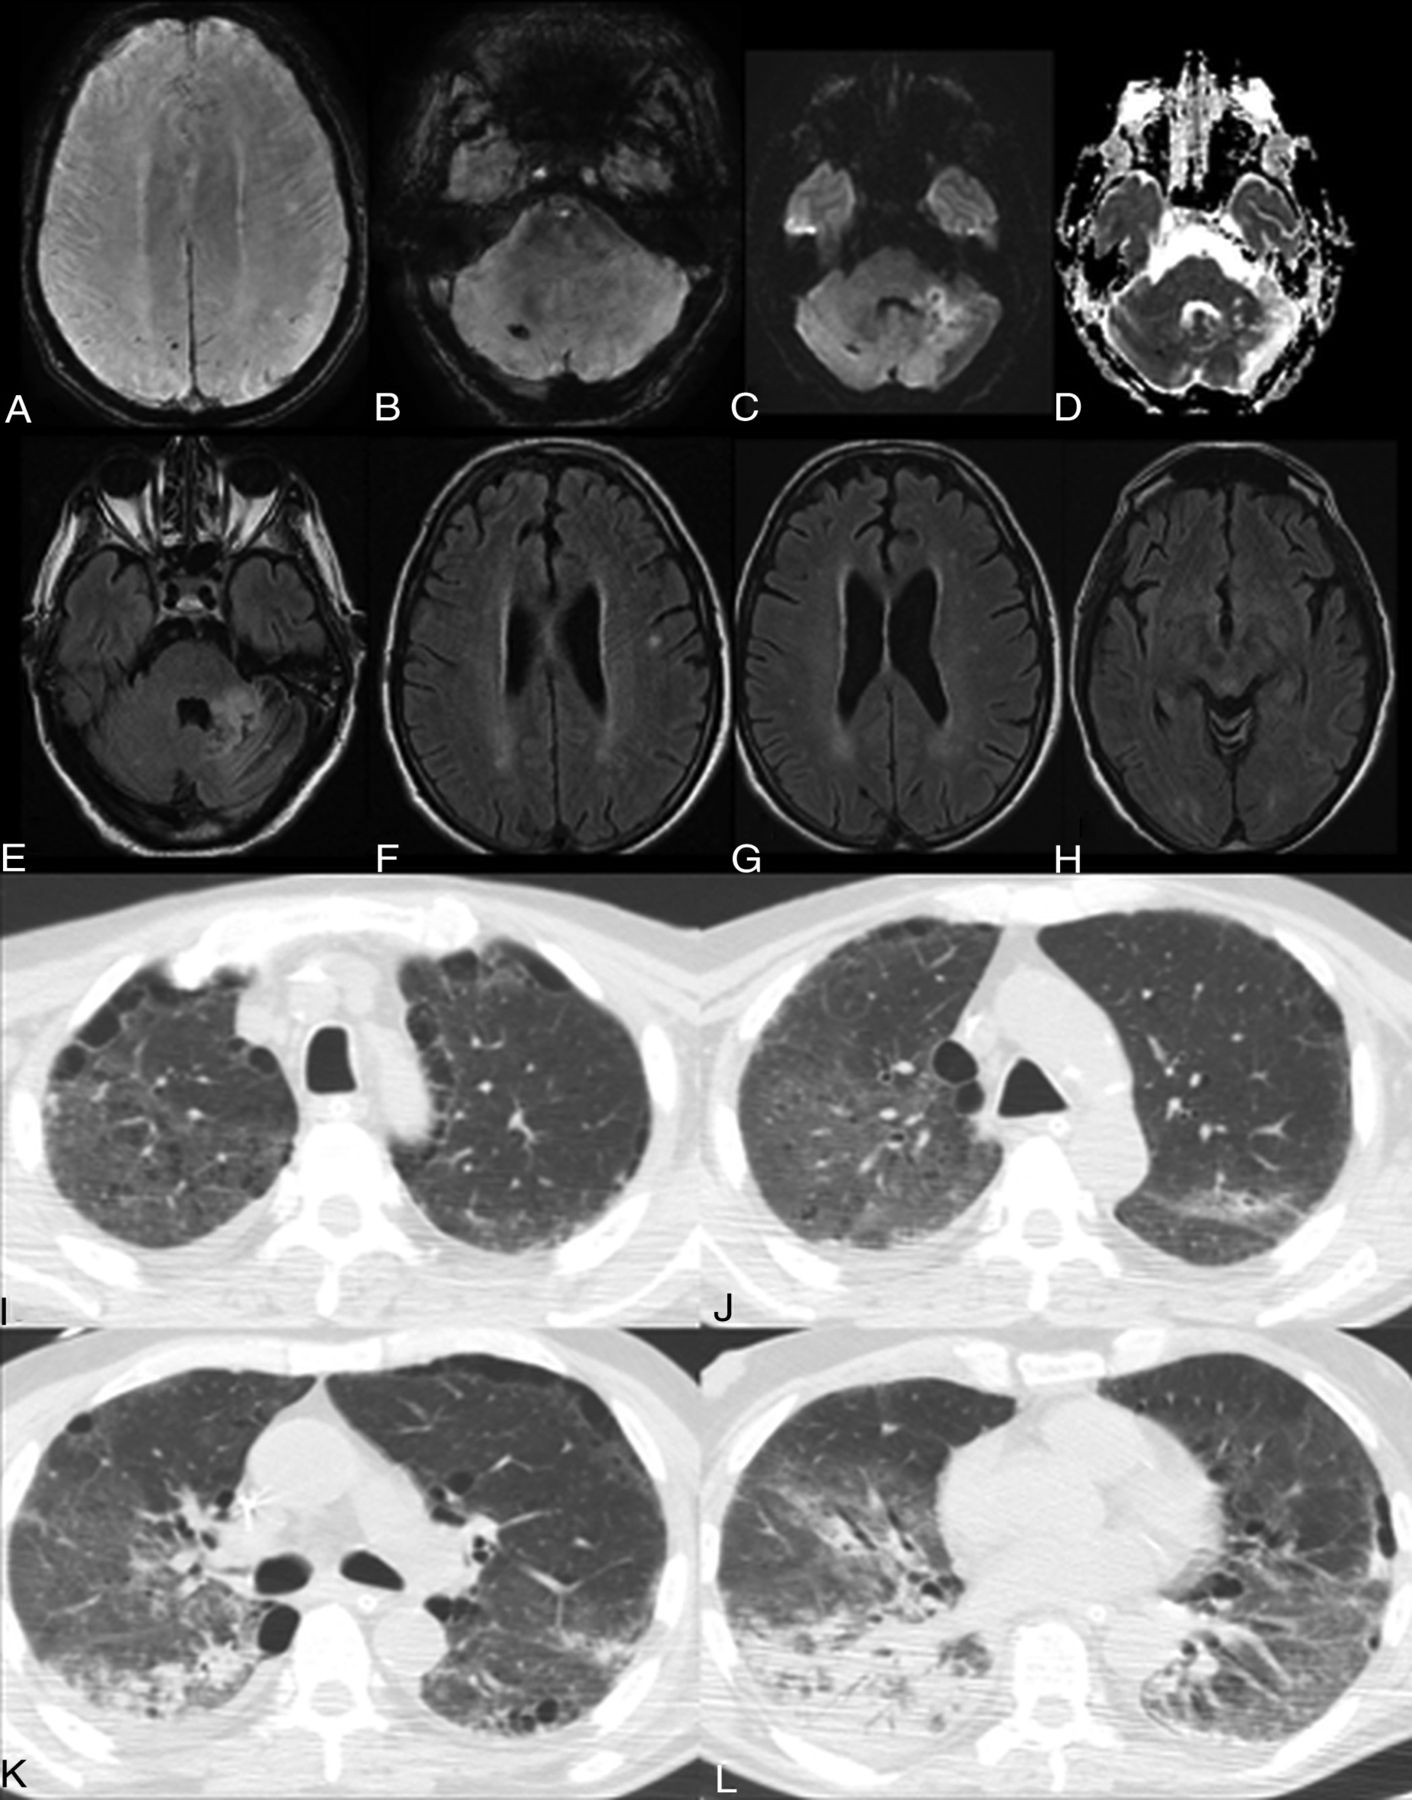 Brain and Lung Imaging Correlation in with COVID-19: Could the Lung Disease Reflect the Prevalence of Acute Abnormalities Neuroimaging? A Global Multicenter Observational Study | American Journal of